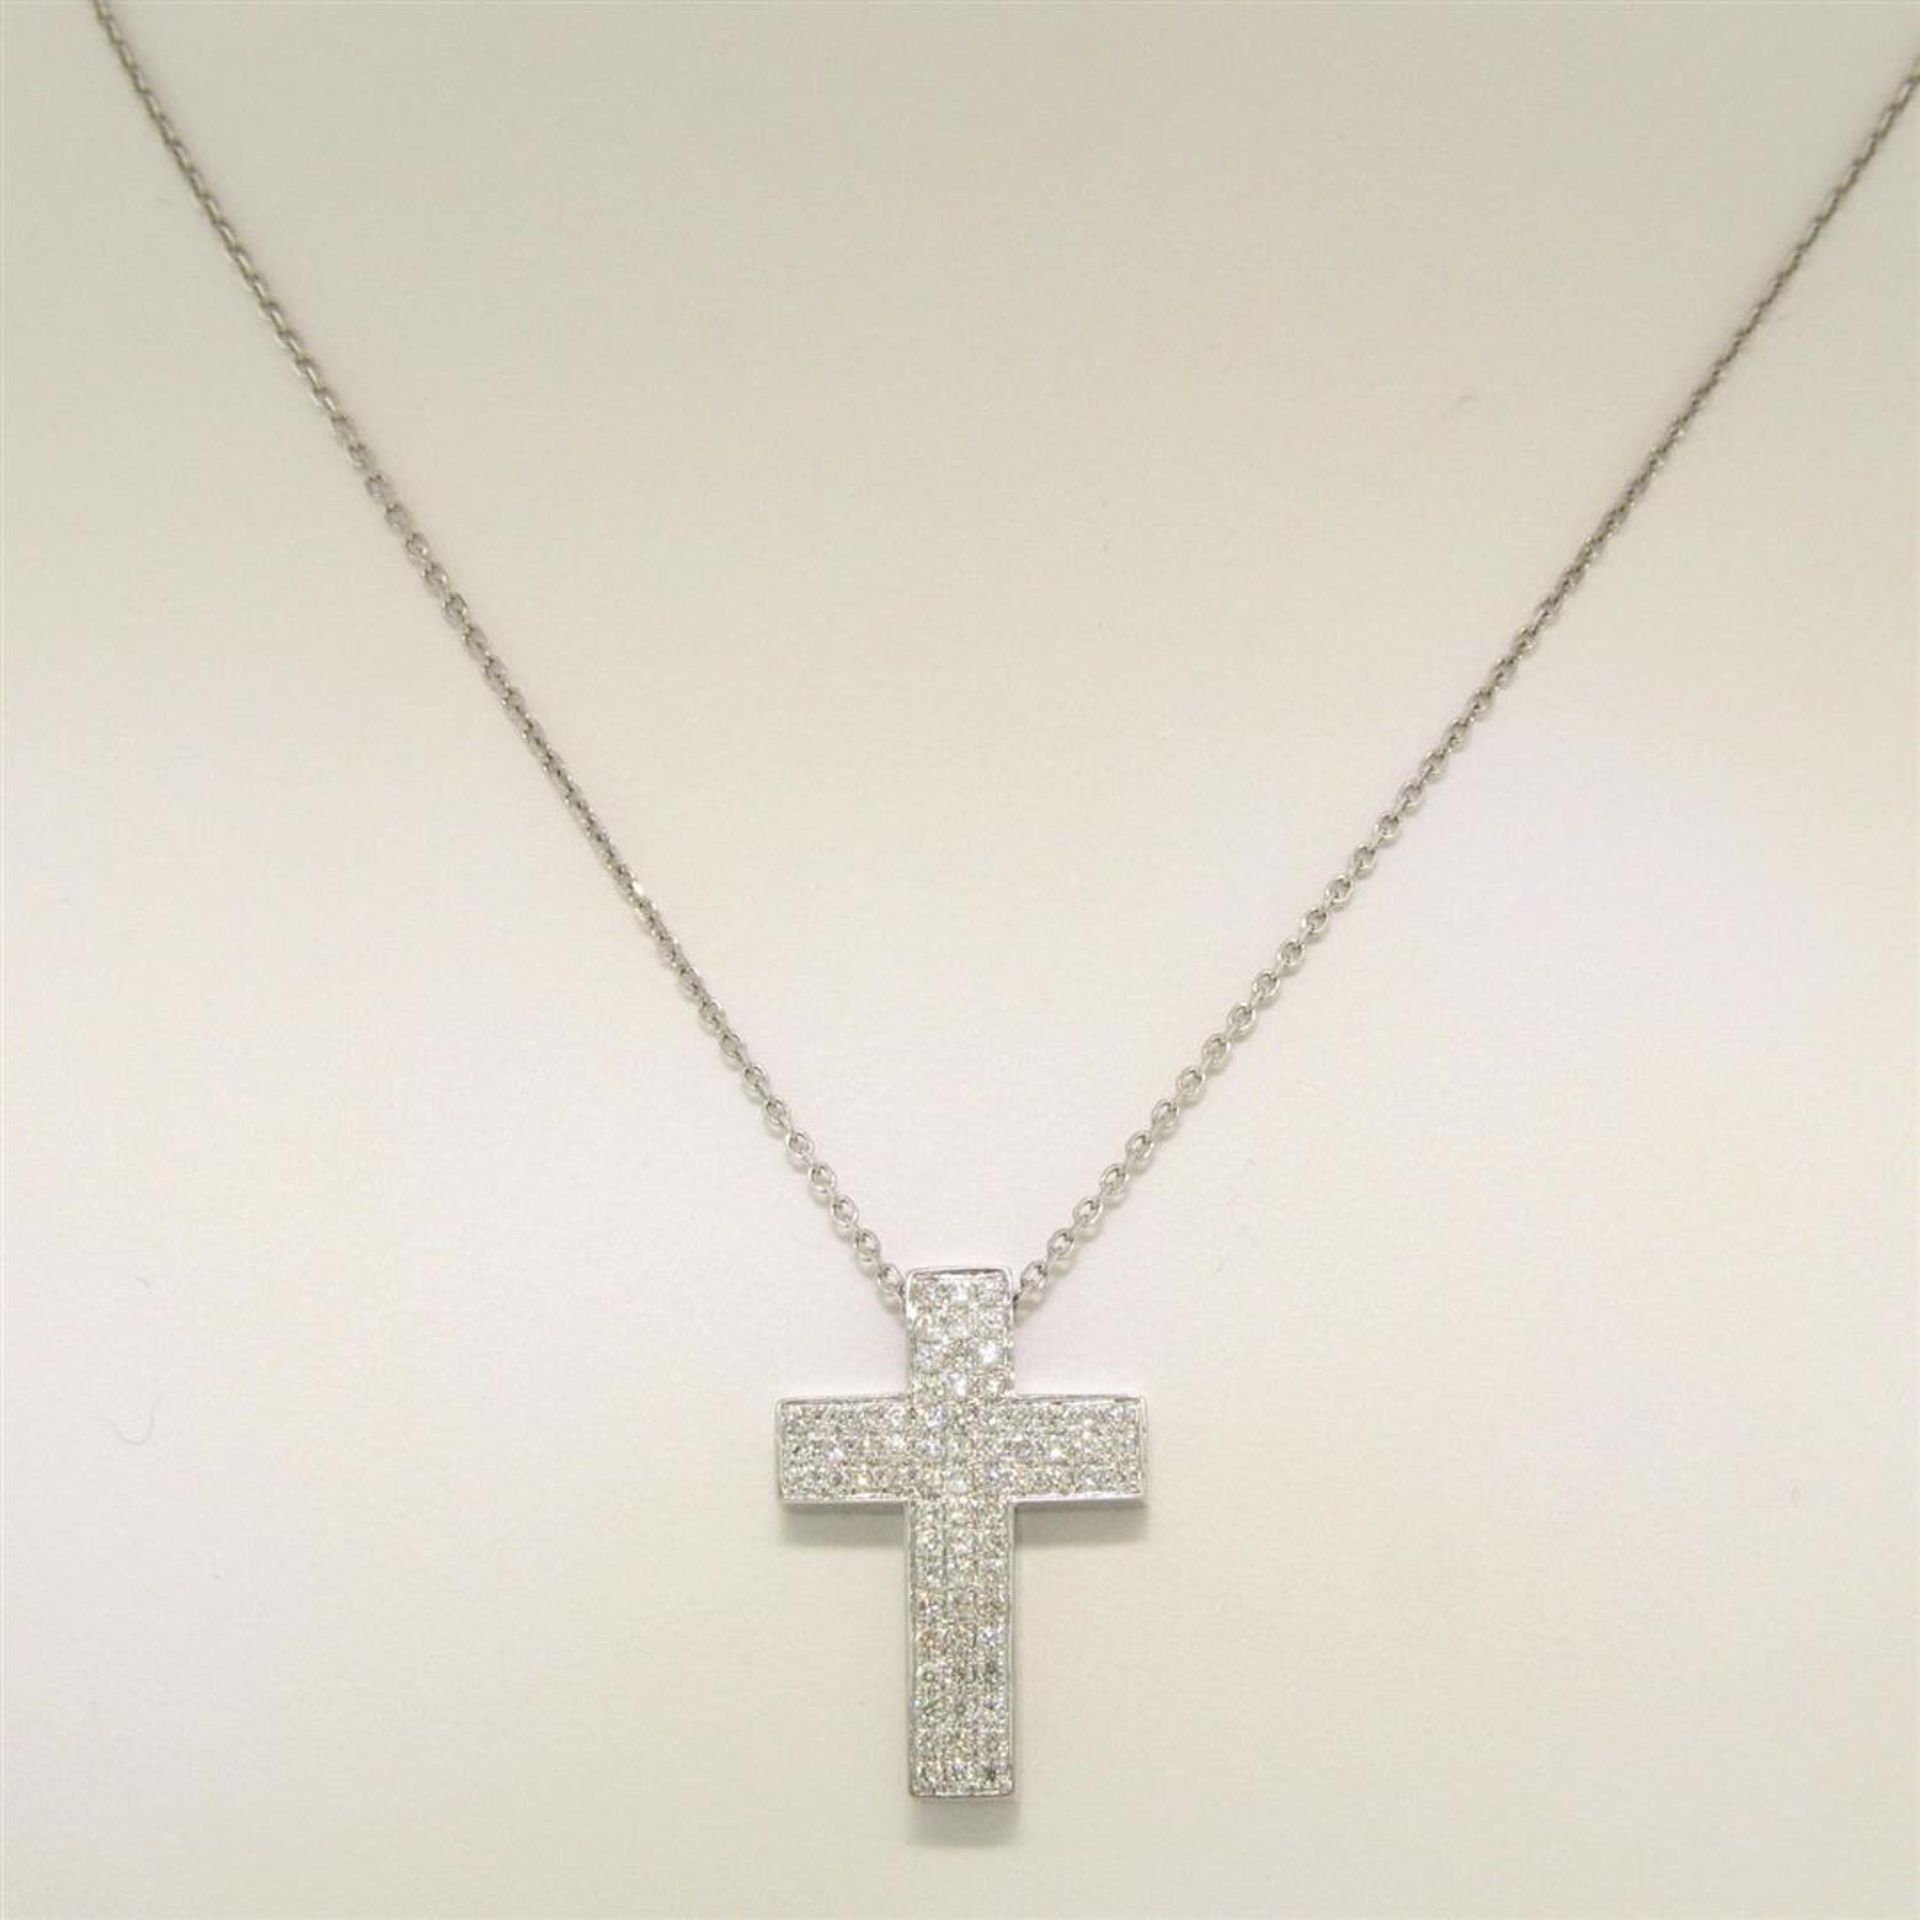 14K White Gold 0.51 ctw Micro Pave Diamond Cross Pendant w/ 18" Cable Link Chain - Image 2 of 8